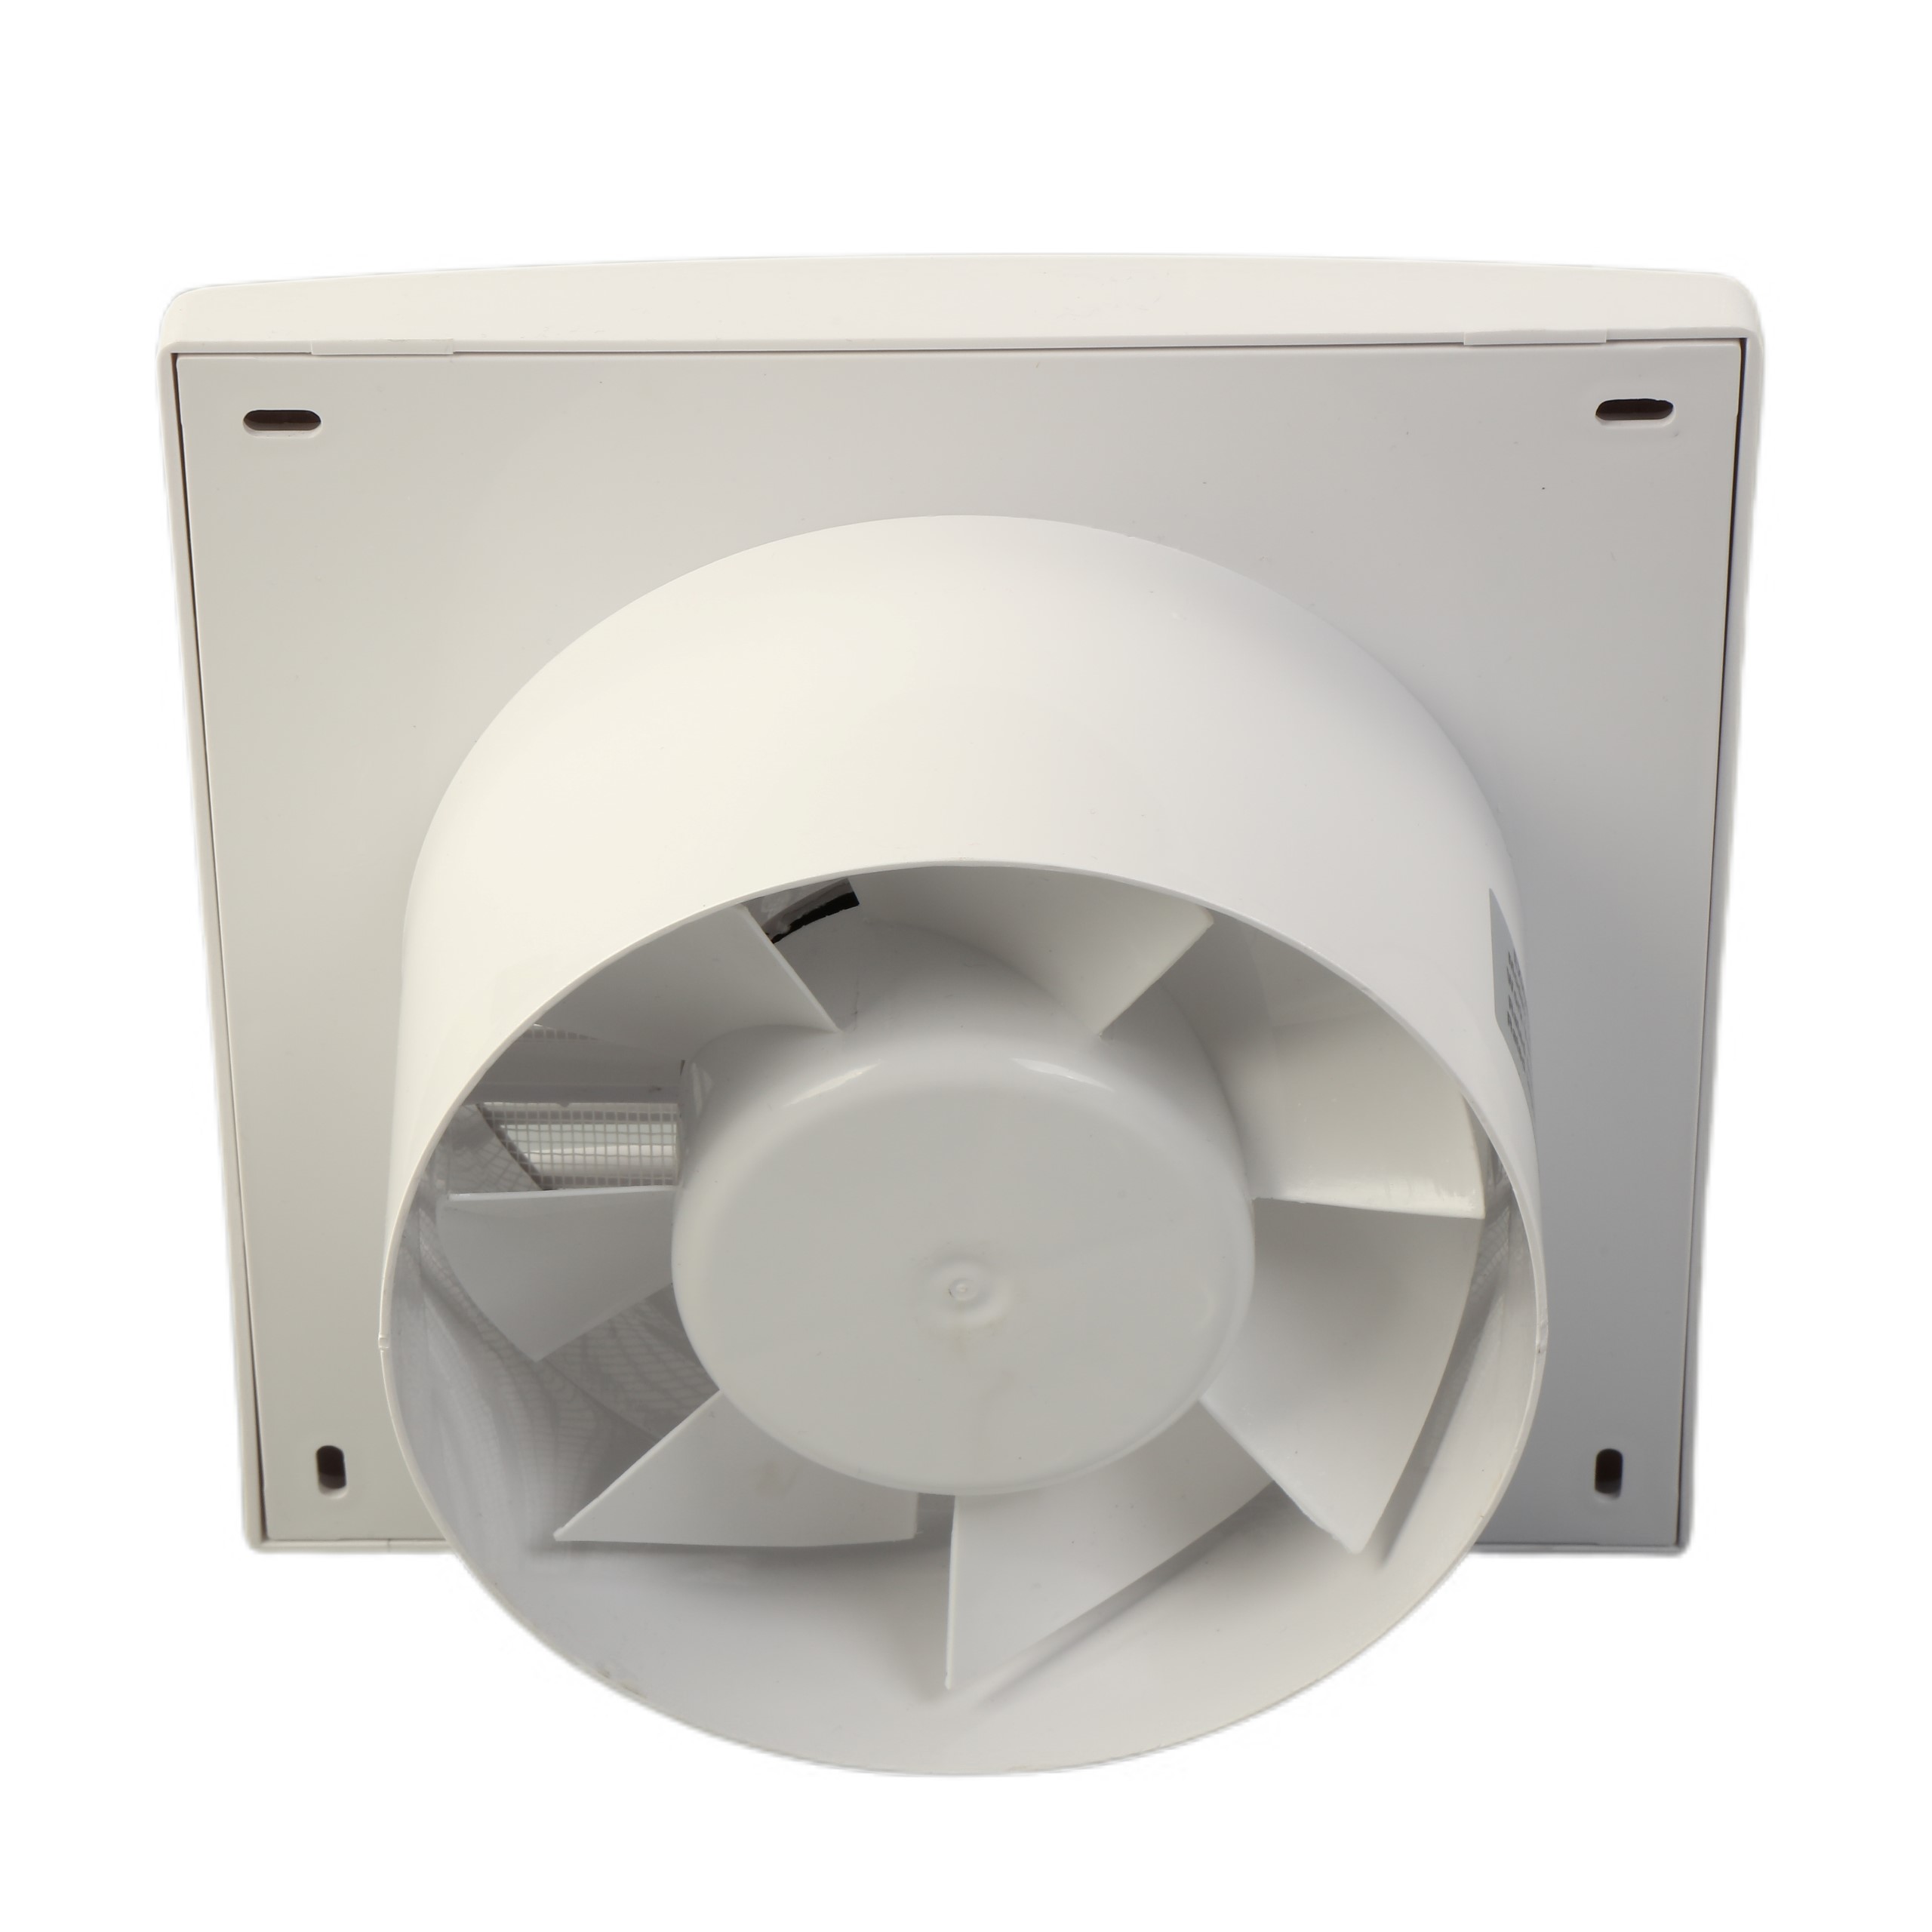 Light  Wall Mounted Ducting Ventilation Exhaust Fan